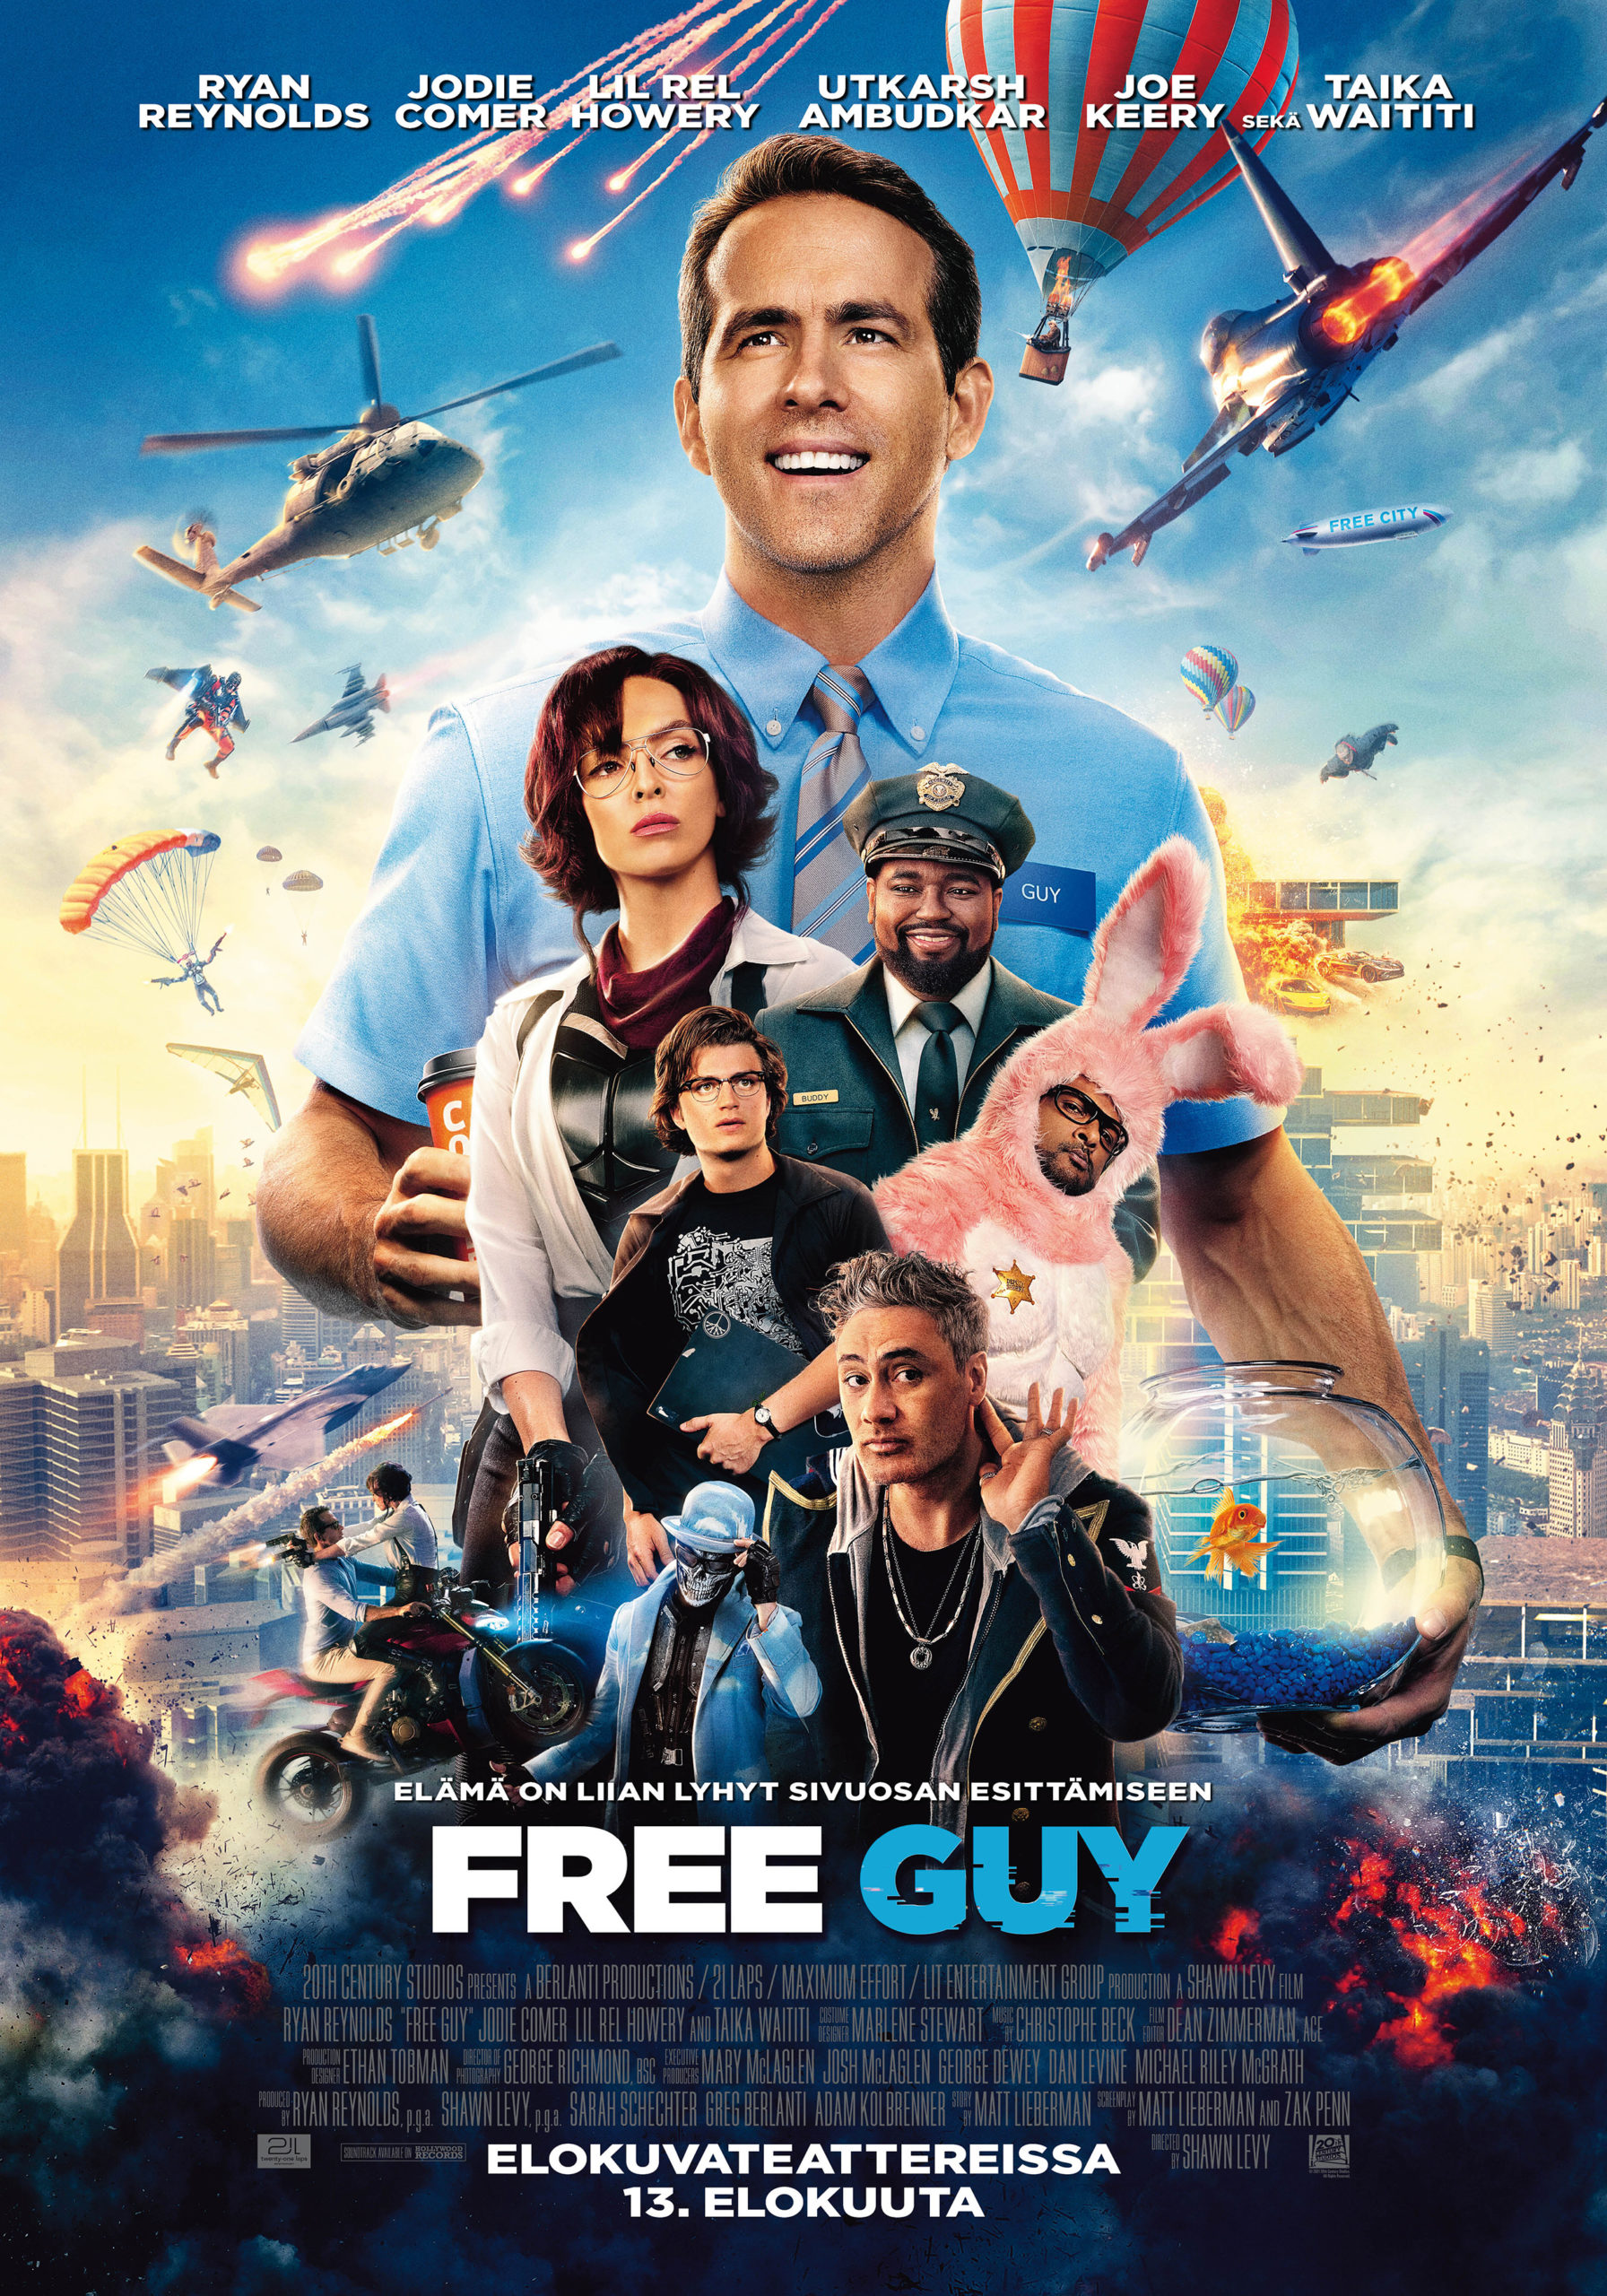 Movie poster of Free Guy.